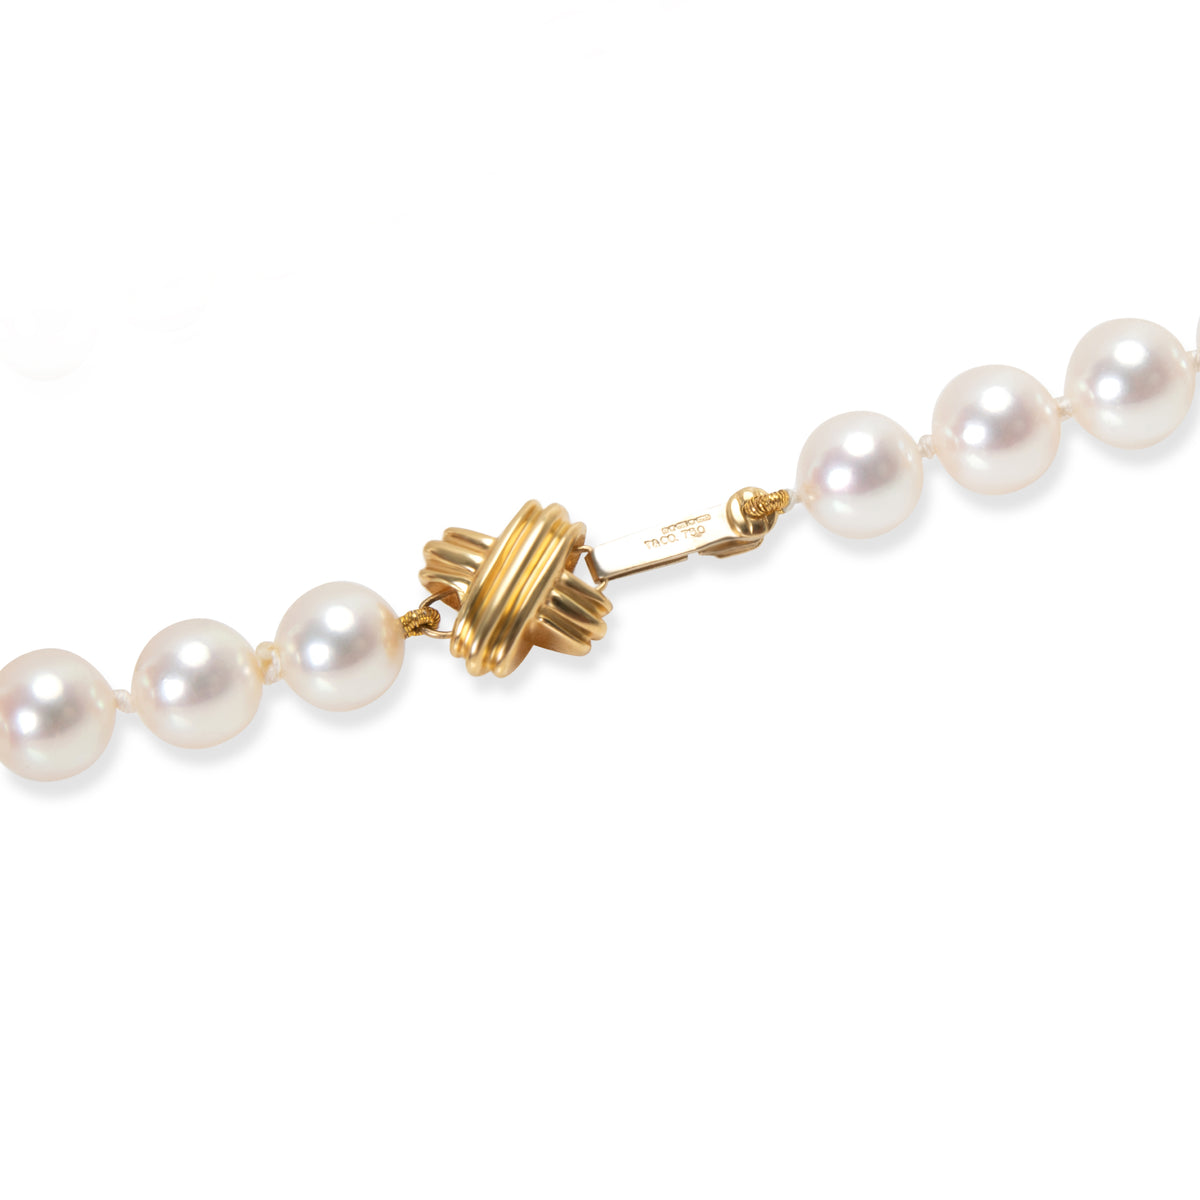 Tiffany & Co. Signature Pearl Necklace with 18K Yellow Gold X Clasp